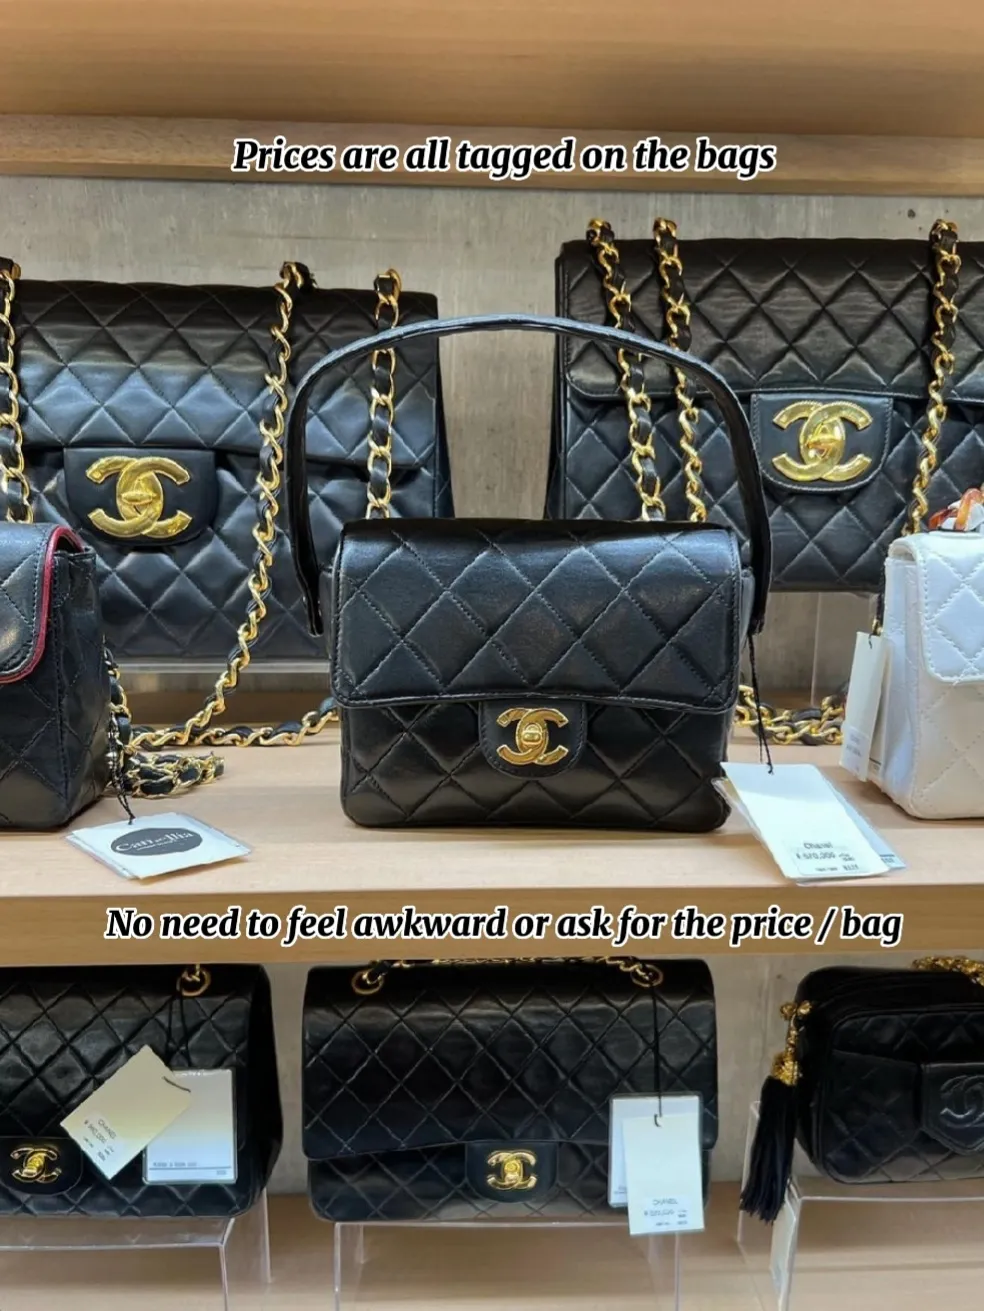 Rare Vintage Chanel Bags & Accessories @ 10% off